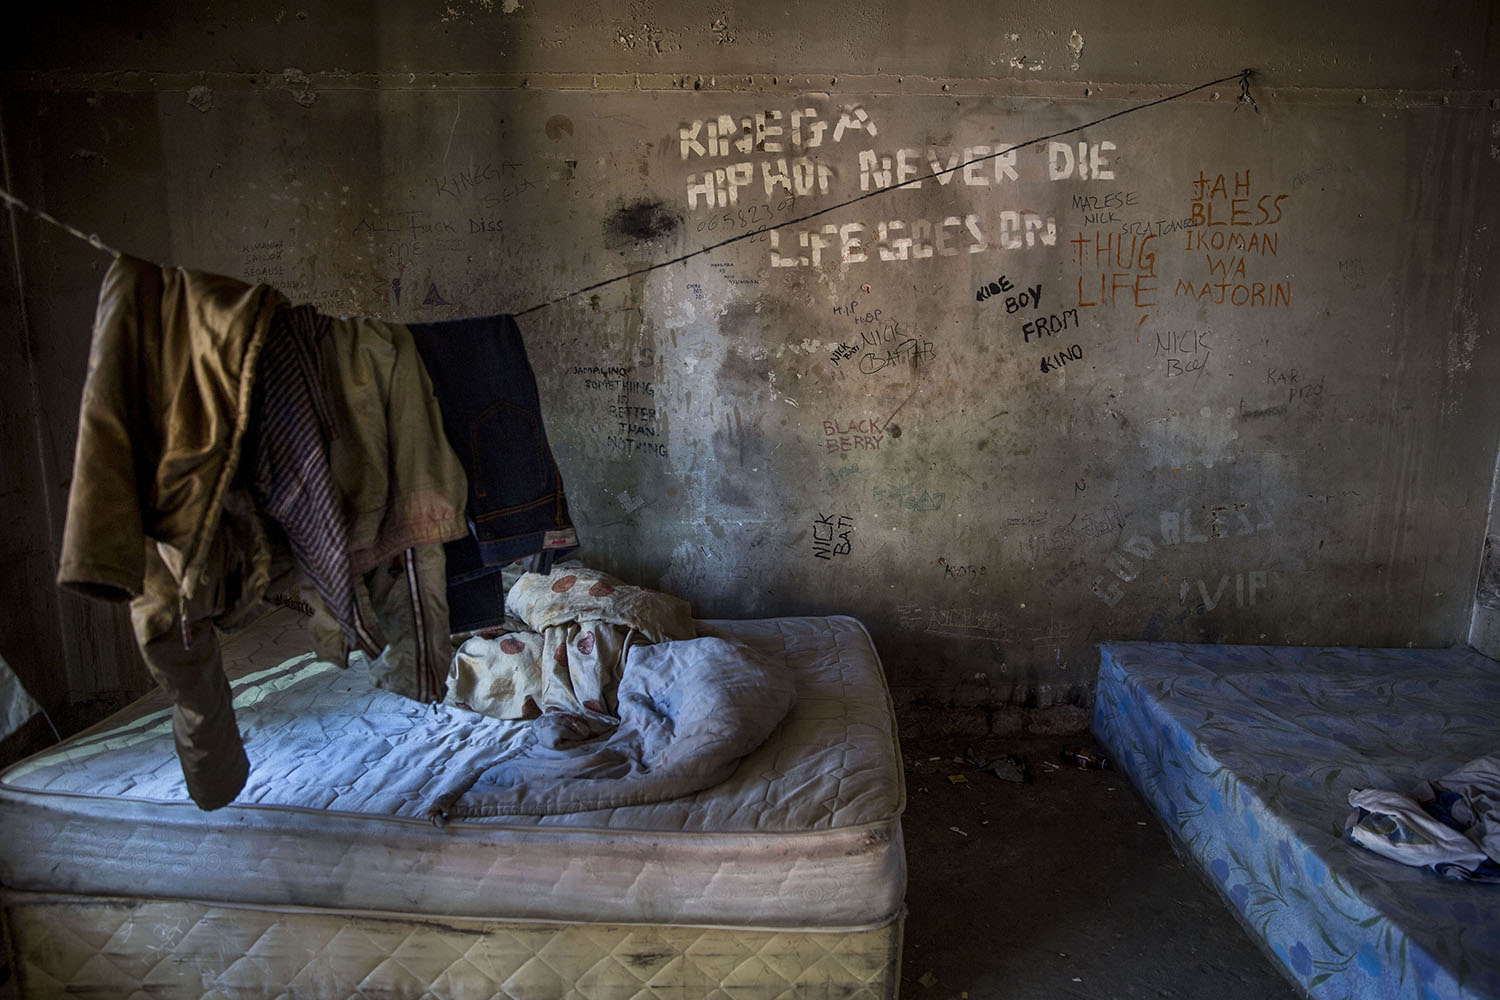 A room that houses several African migrants, July 17, 2015.